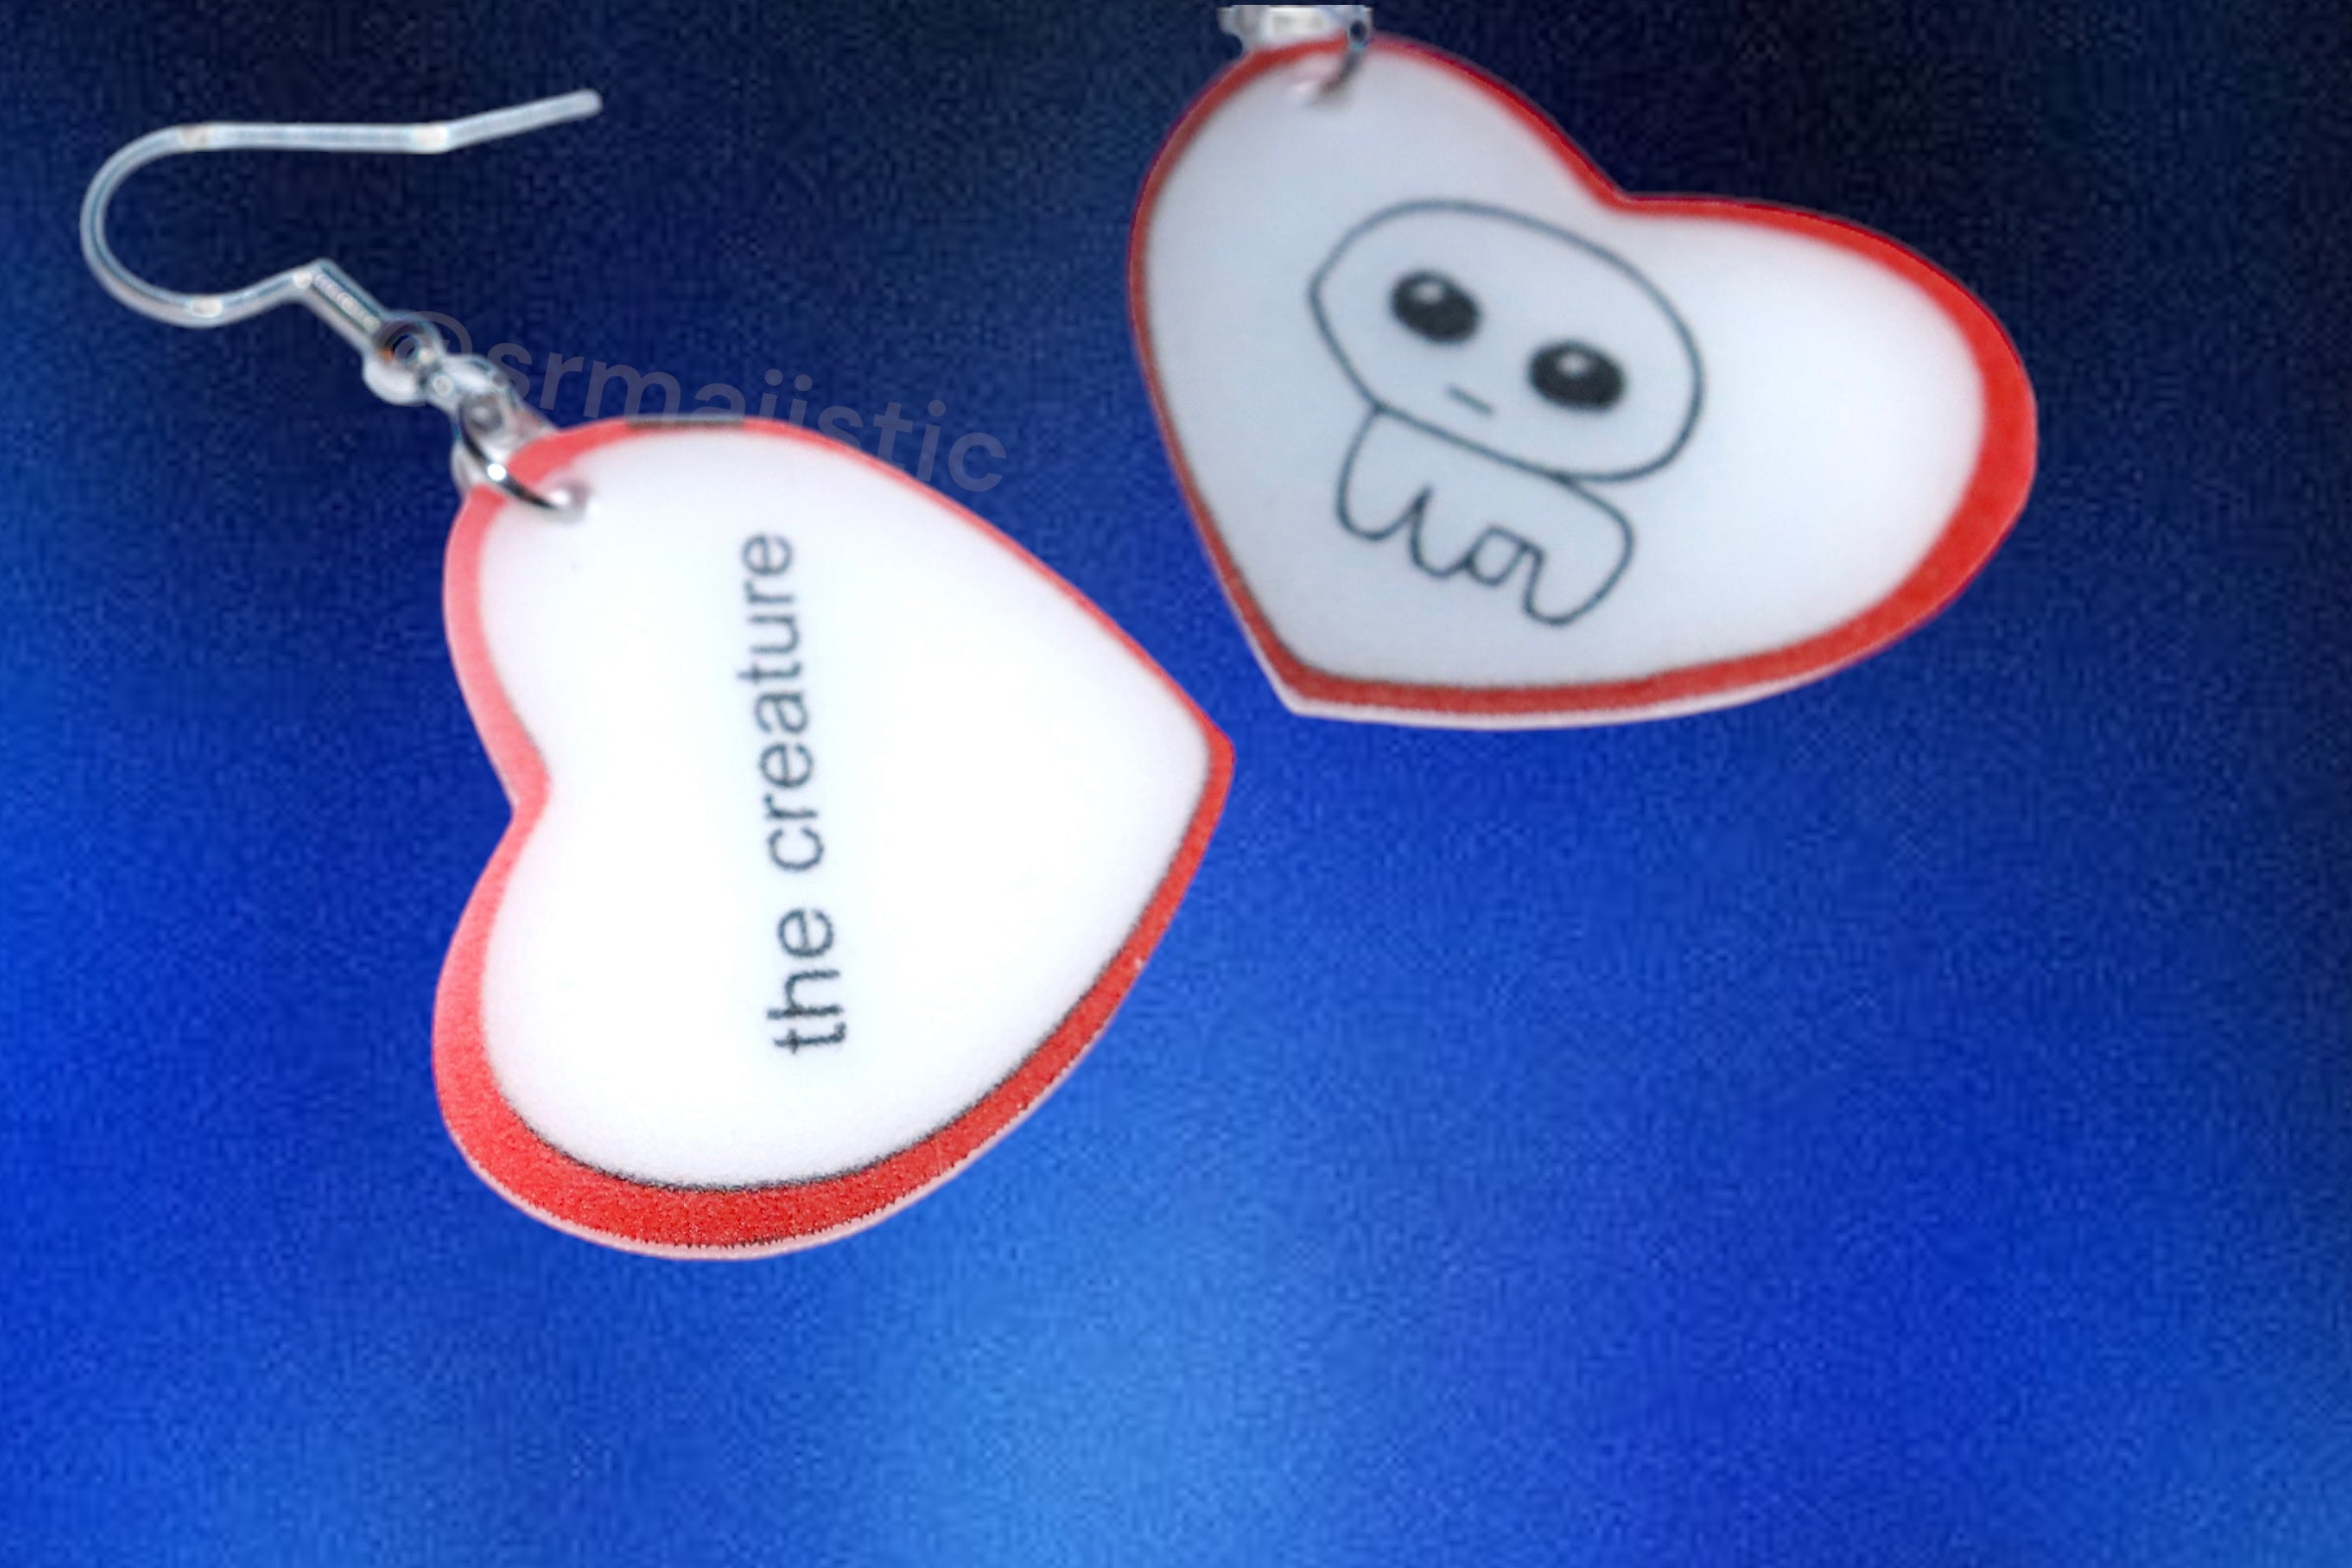 The Creature (Autism TBH Creature) Meme Character Locket Heart 2D detailed Handmade Earrings!